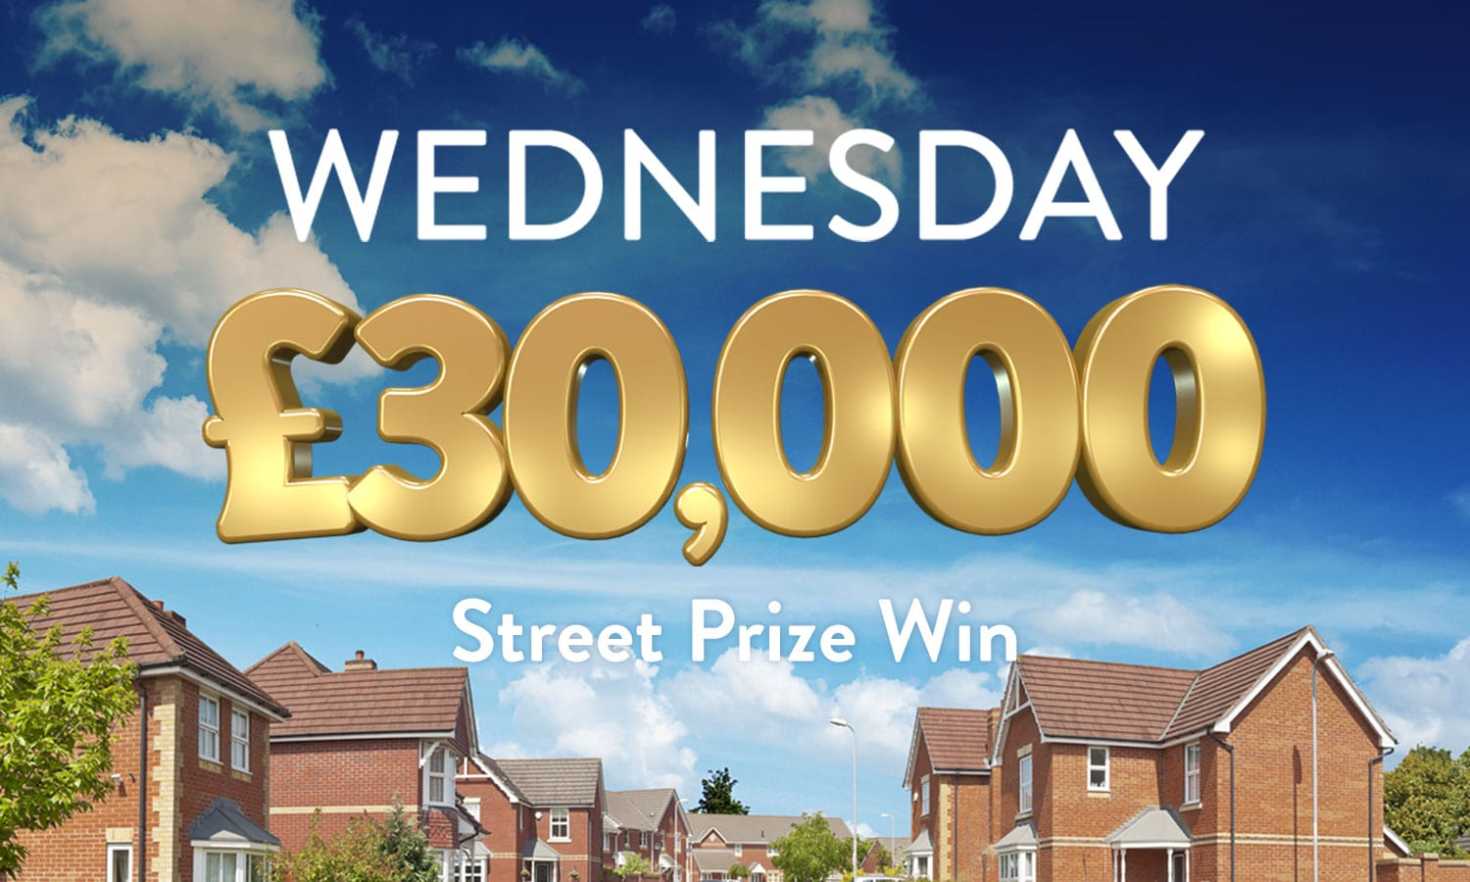 Every lucky ticket wins £30,000 in today's Street Prize